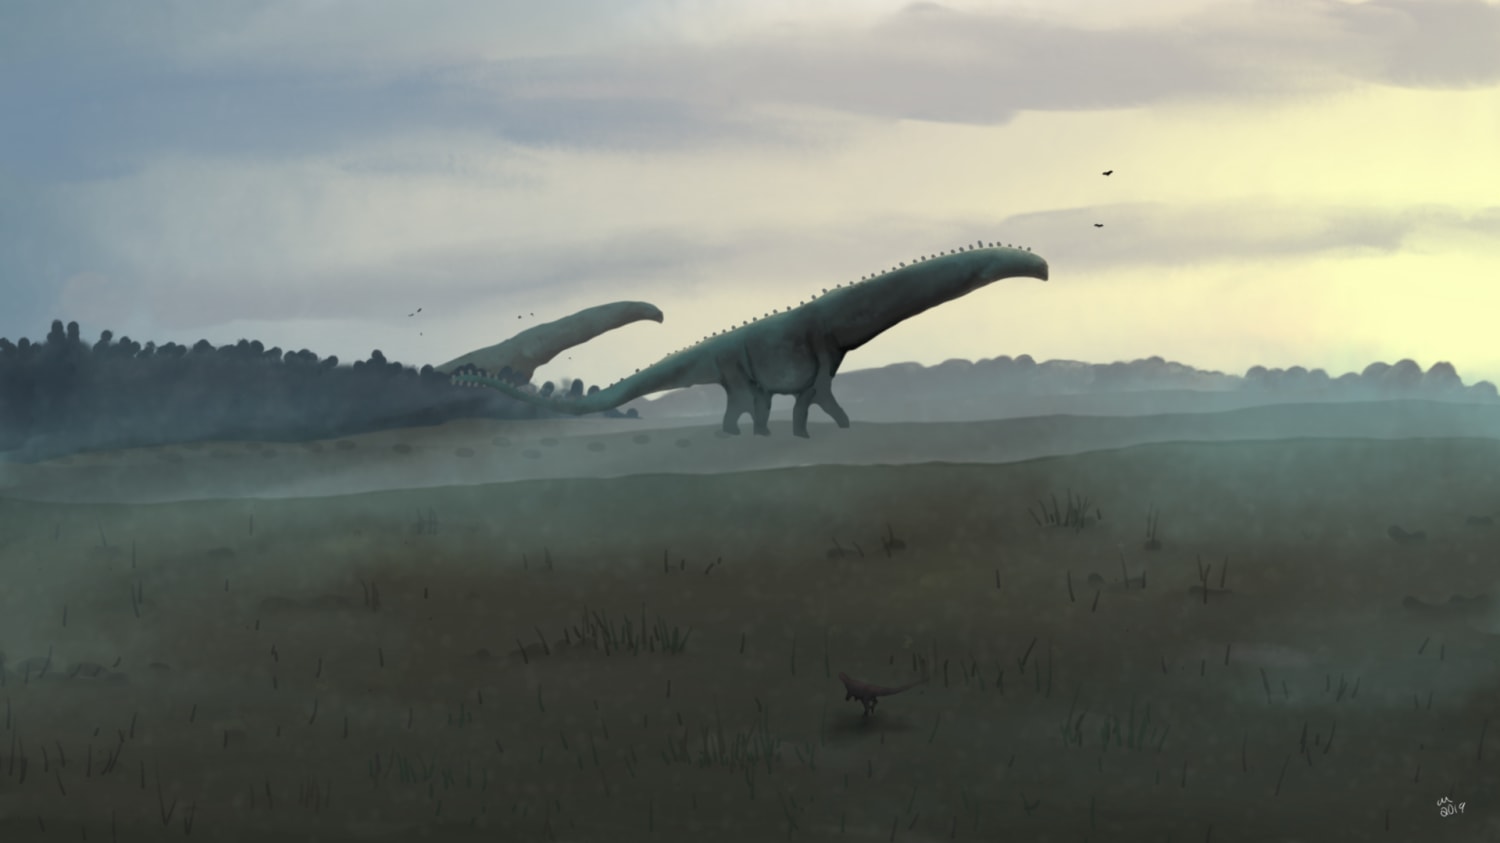 It is the dawn of a new day in Argentina, 101 million years ago, and pair of Patagotitans emerge of a forest , dwarfing everything around them (art by PaleoEquii).